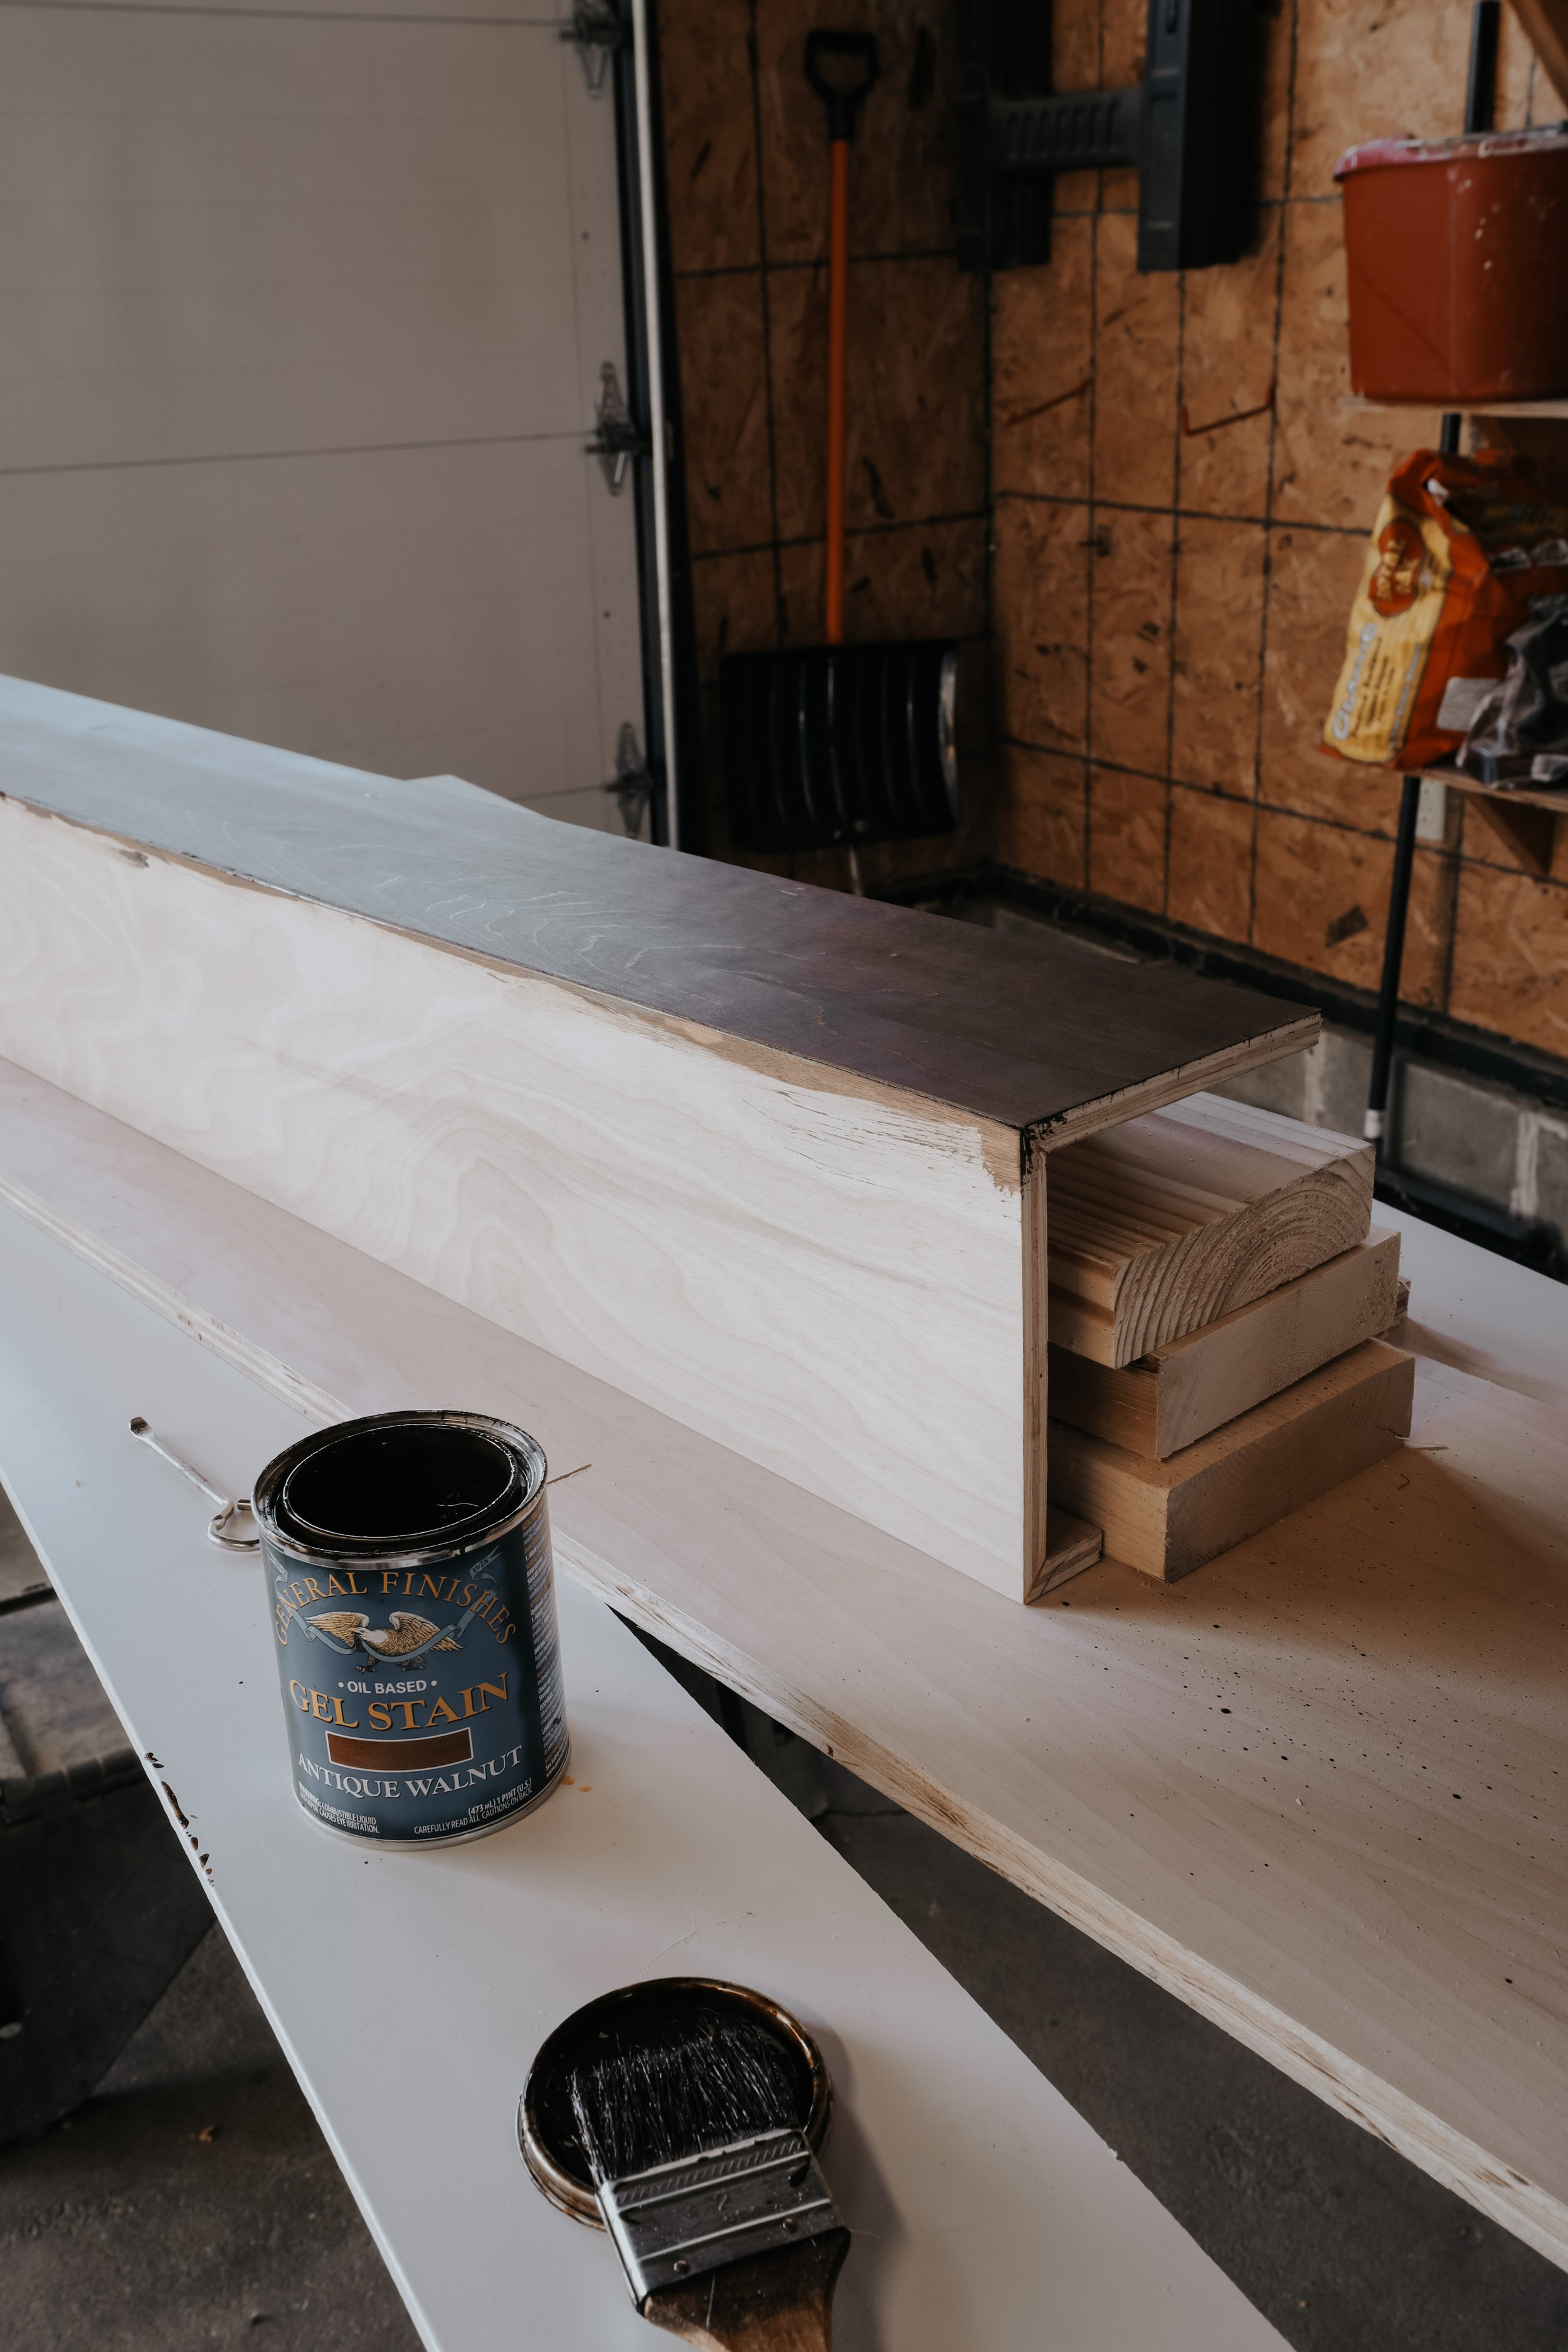 How to build a faux beam | Nadine Stay - How to build a hollow beam out of plywood. How to cover up an ugly beam. DIY beam tutorial with mitered edges.